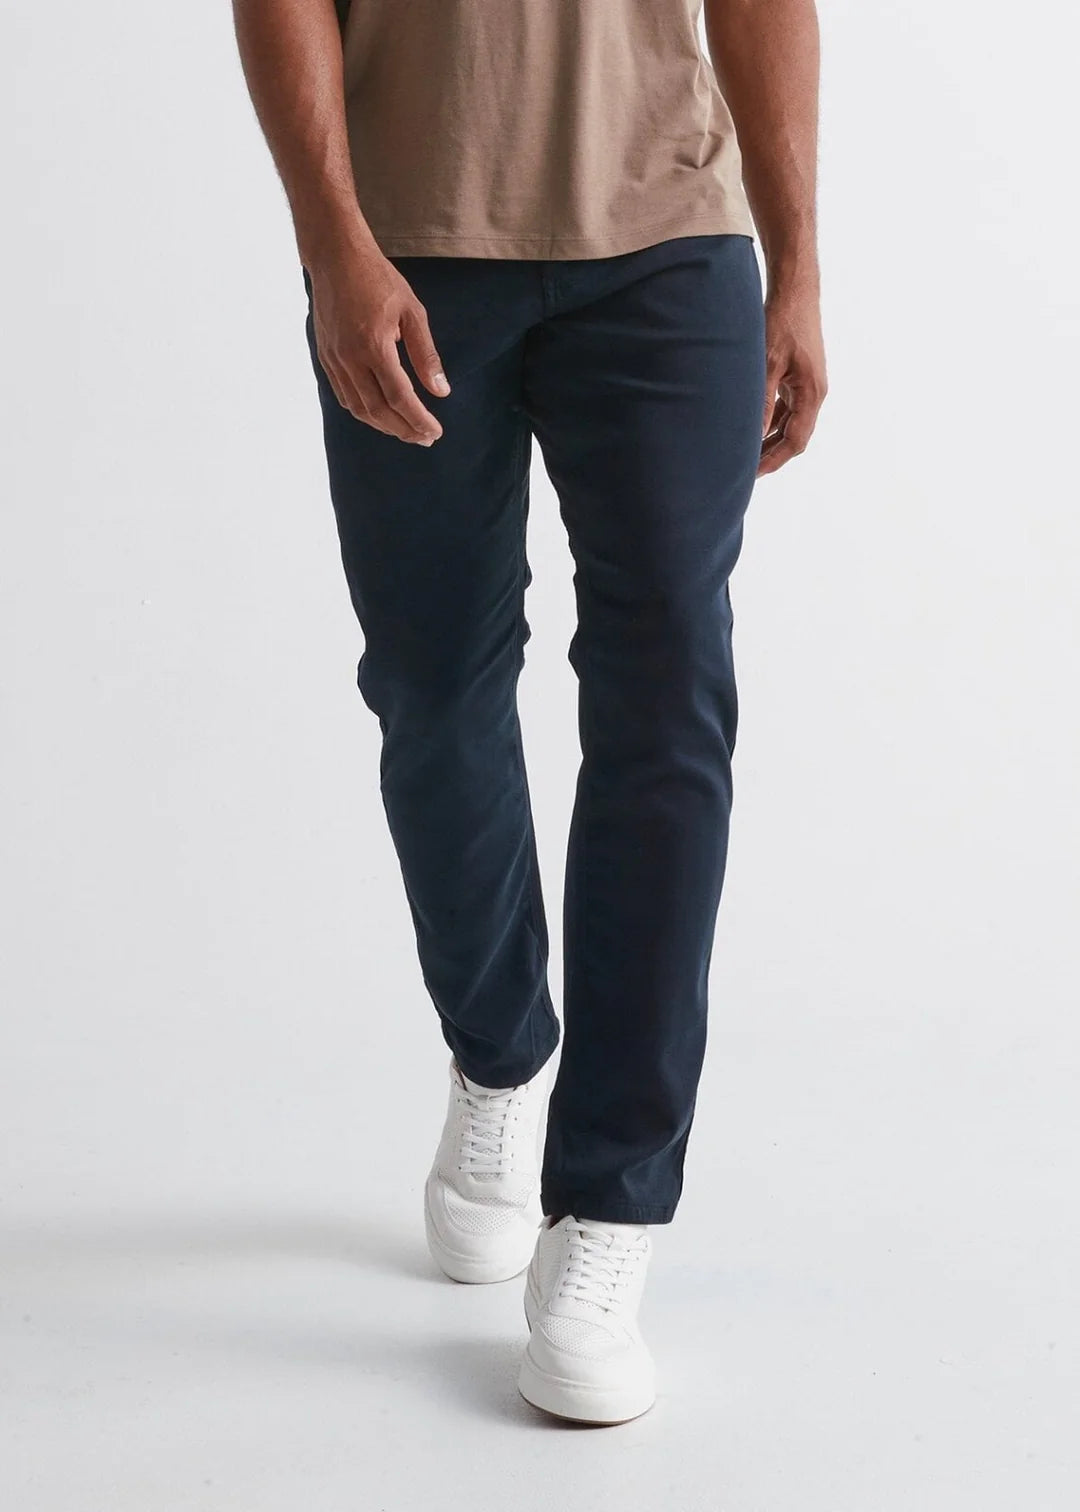 No Sweat Pant Relaxed Taper